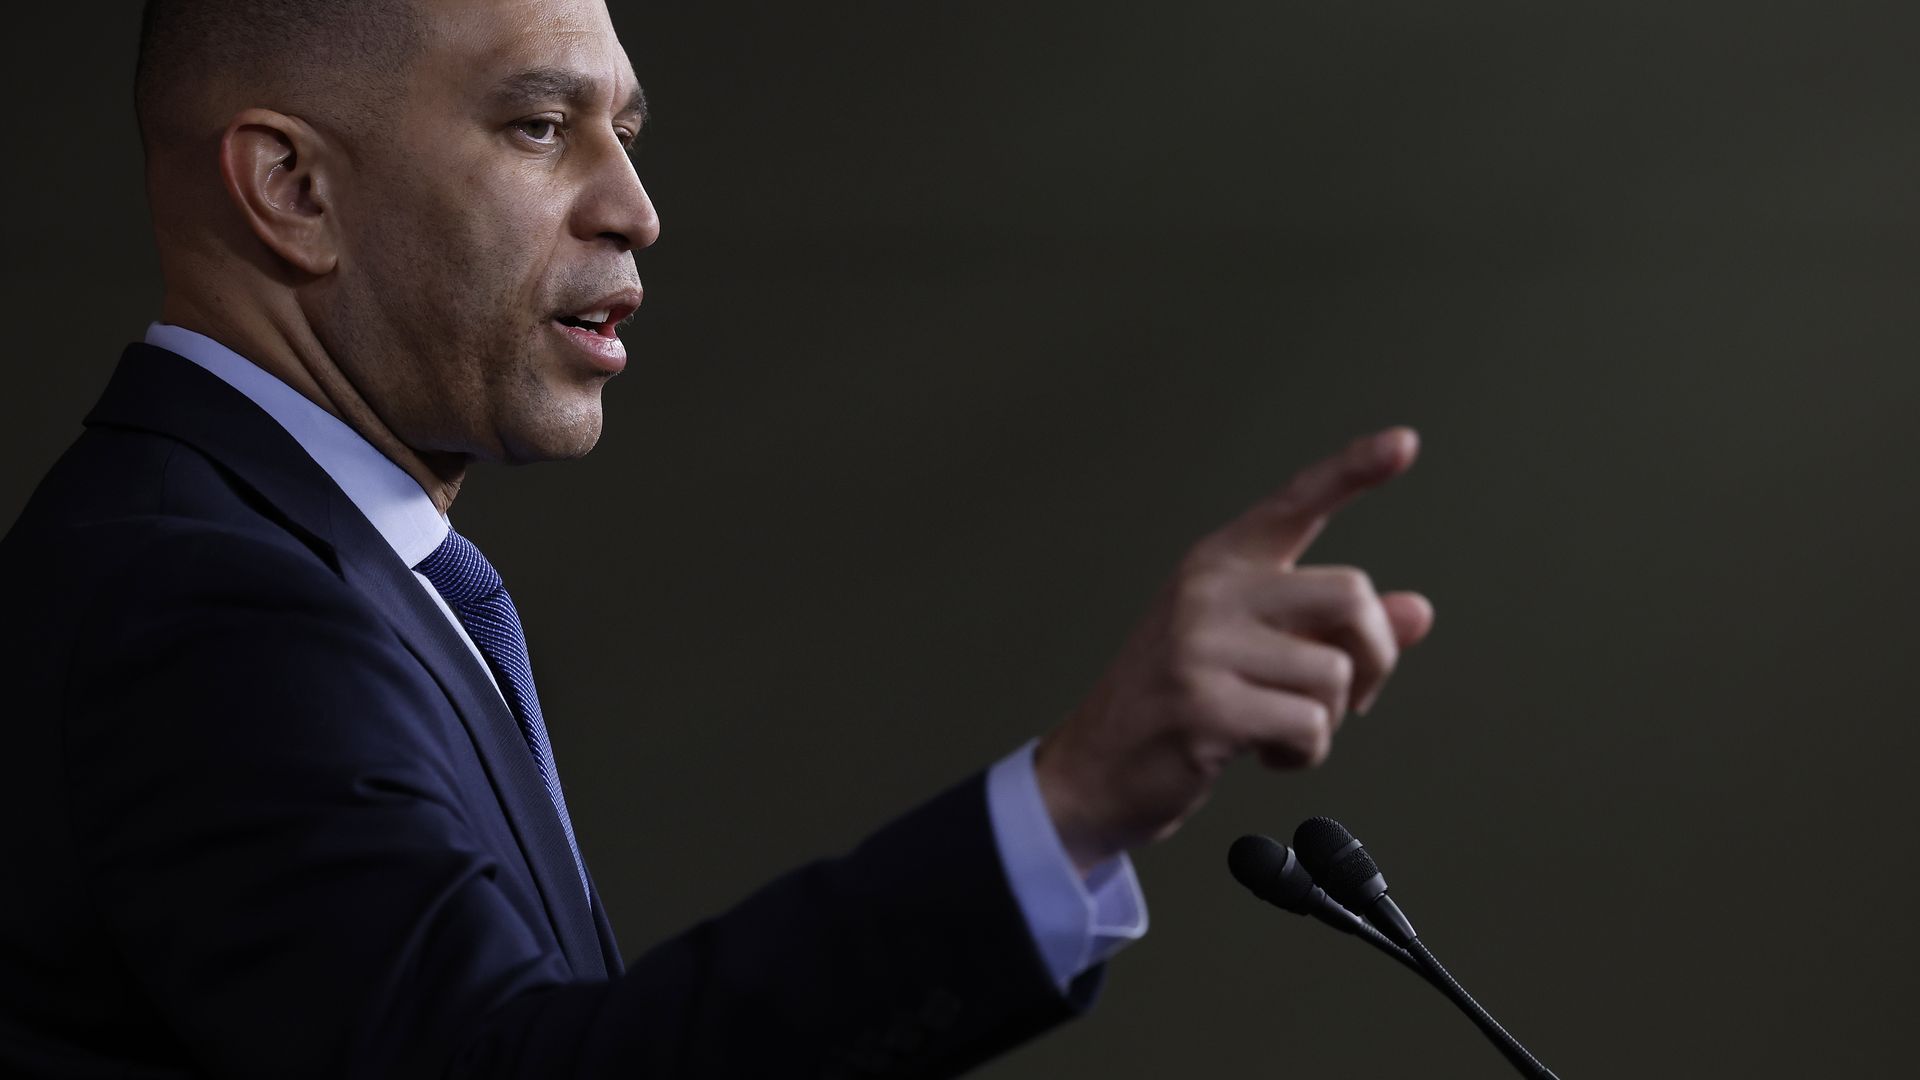 House Minority Leader Hakeem Jeffries, wearing a blue shirt, blue suit, and blue tie, standing at a microphone.